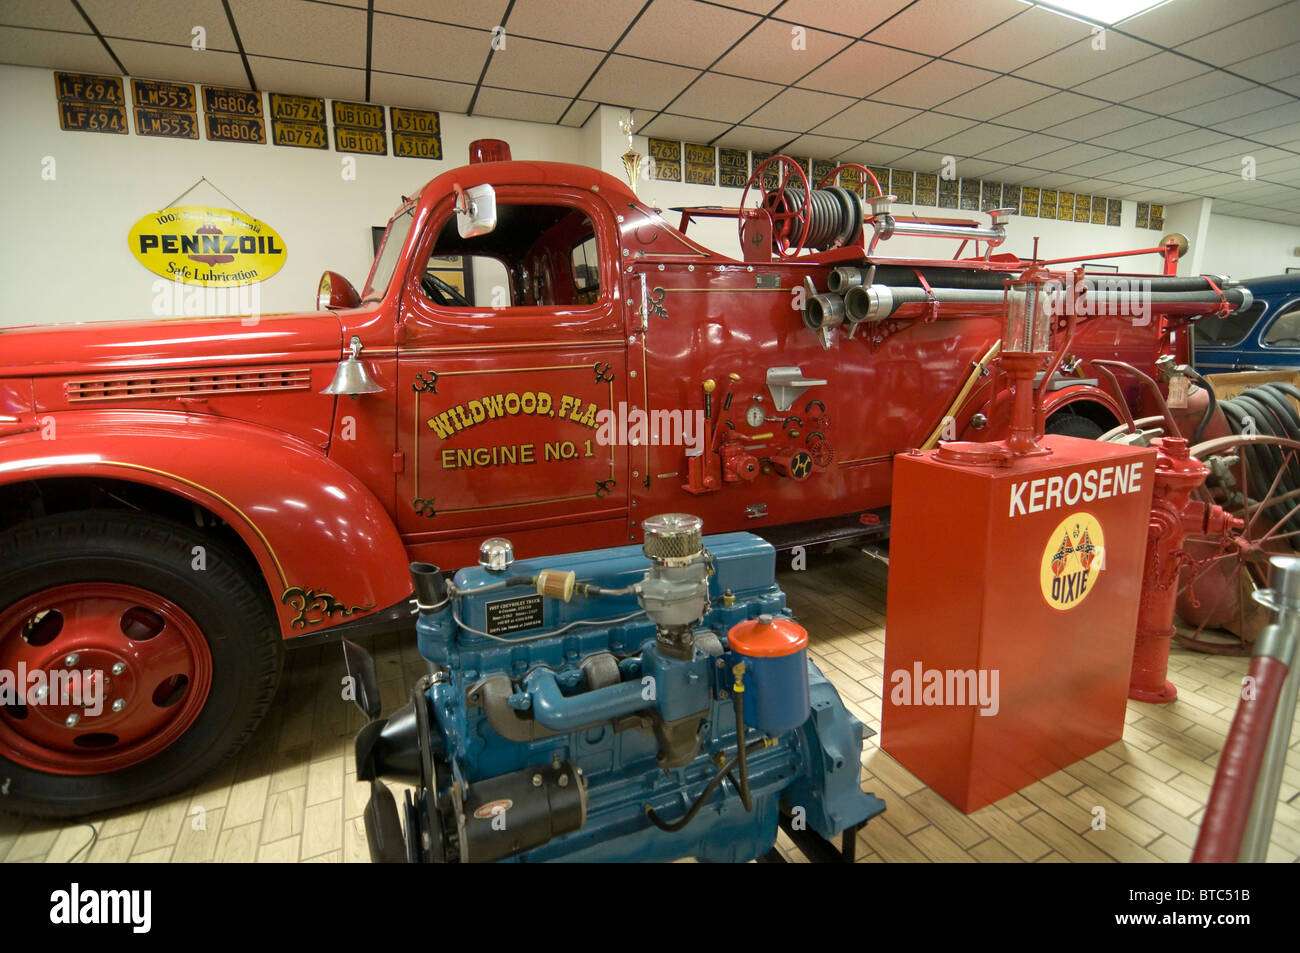 Don Garlits Museum of Classic Automobiles Ocala Florida vintage red fire truck Stock Photo